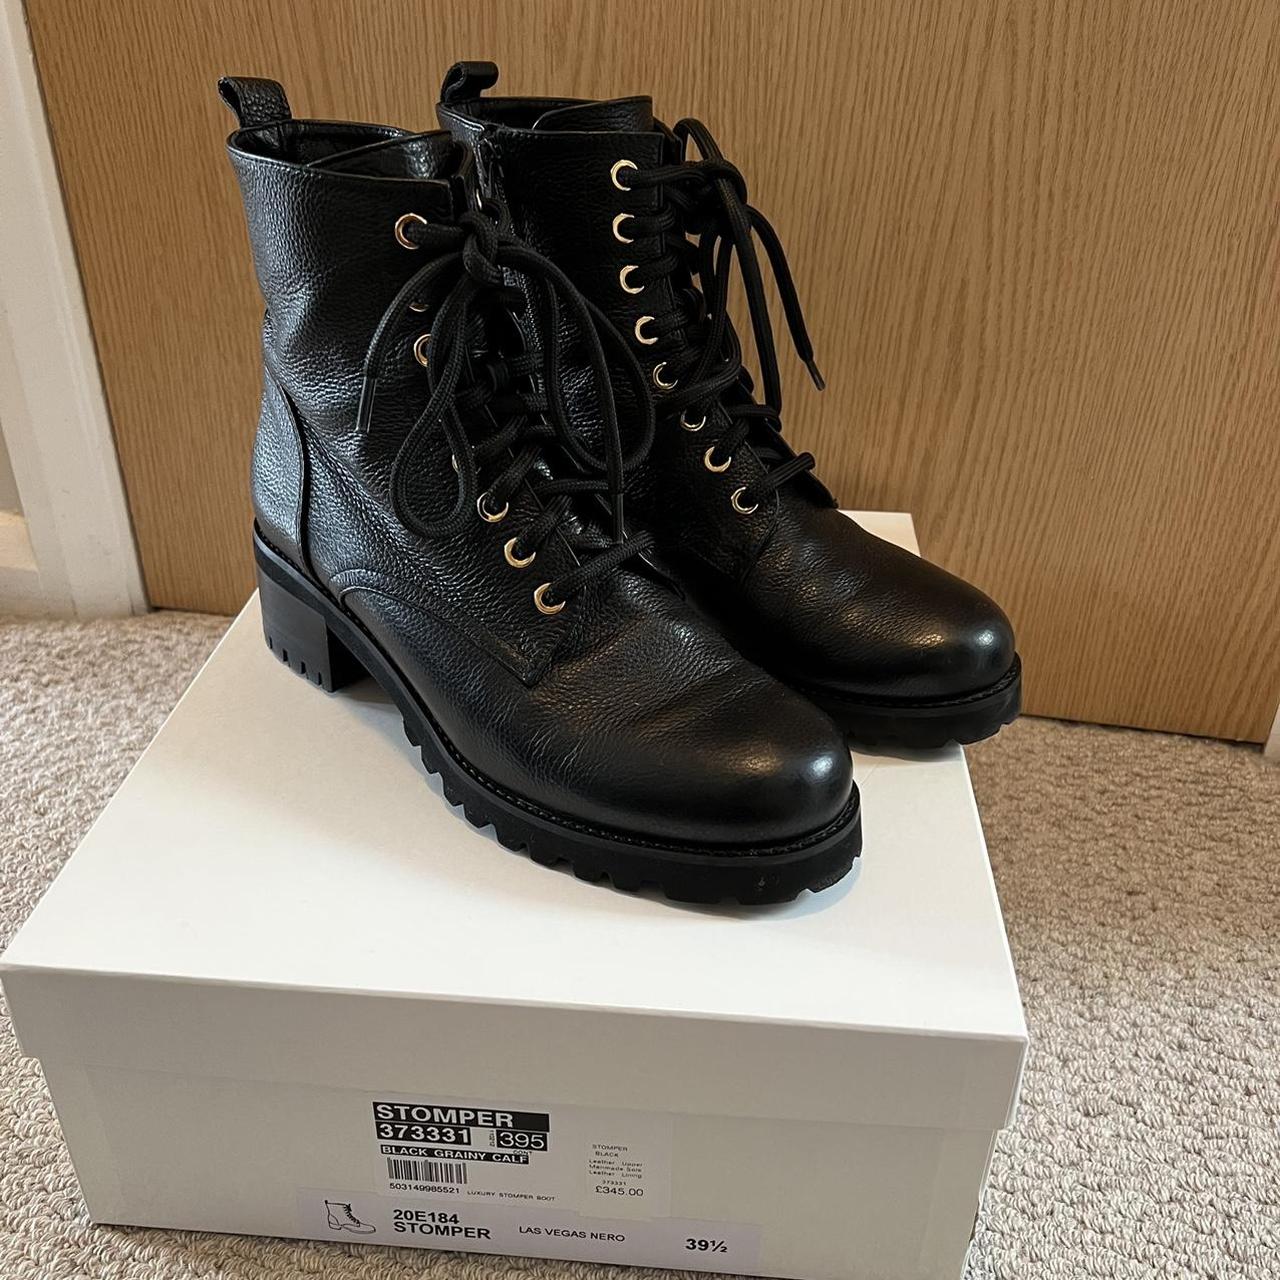 Russell & Bromley Black Leather STOMPER Luxury... - Depop